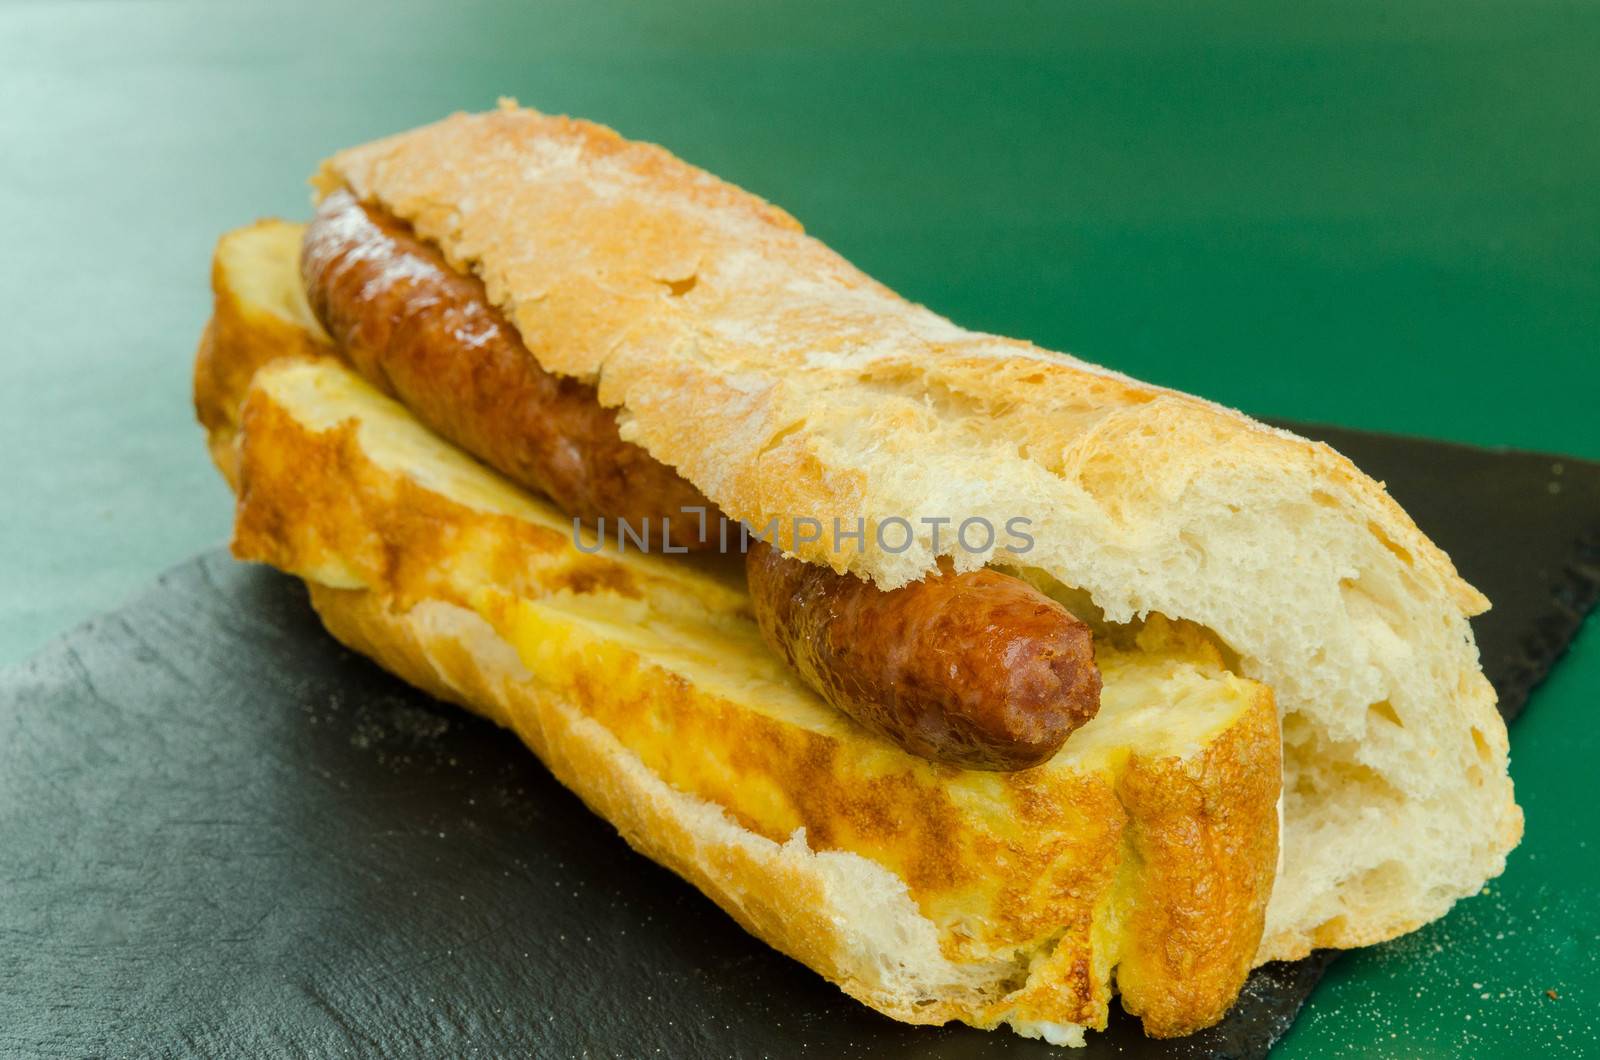 Potato omelet sandwich with pork sausage, typical Spanish lunch